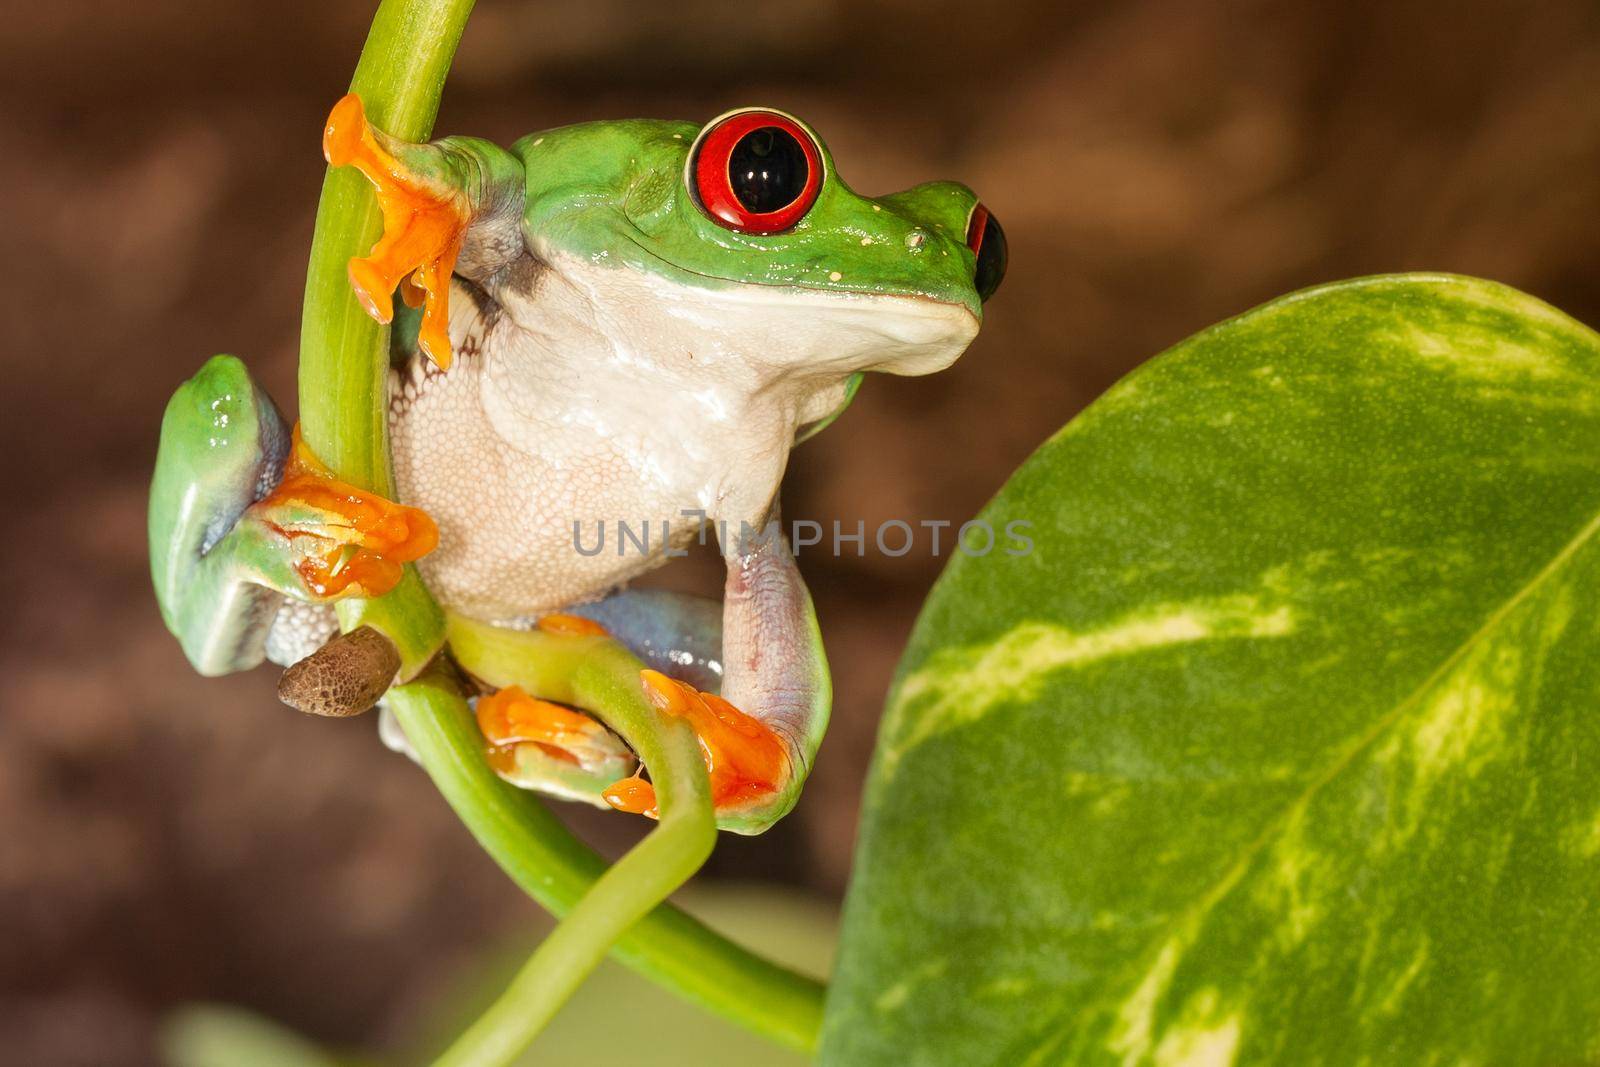 Red-eyed frog svings on the plant stem